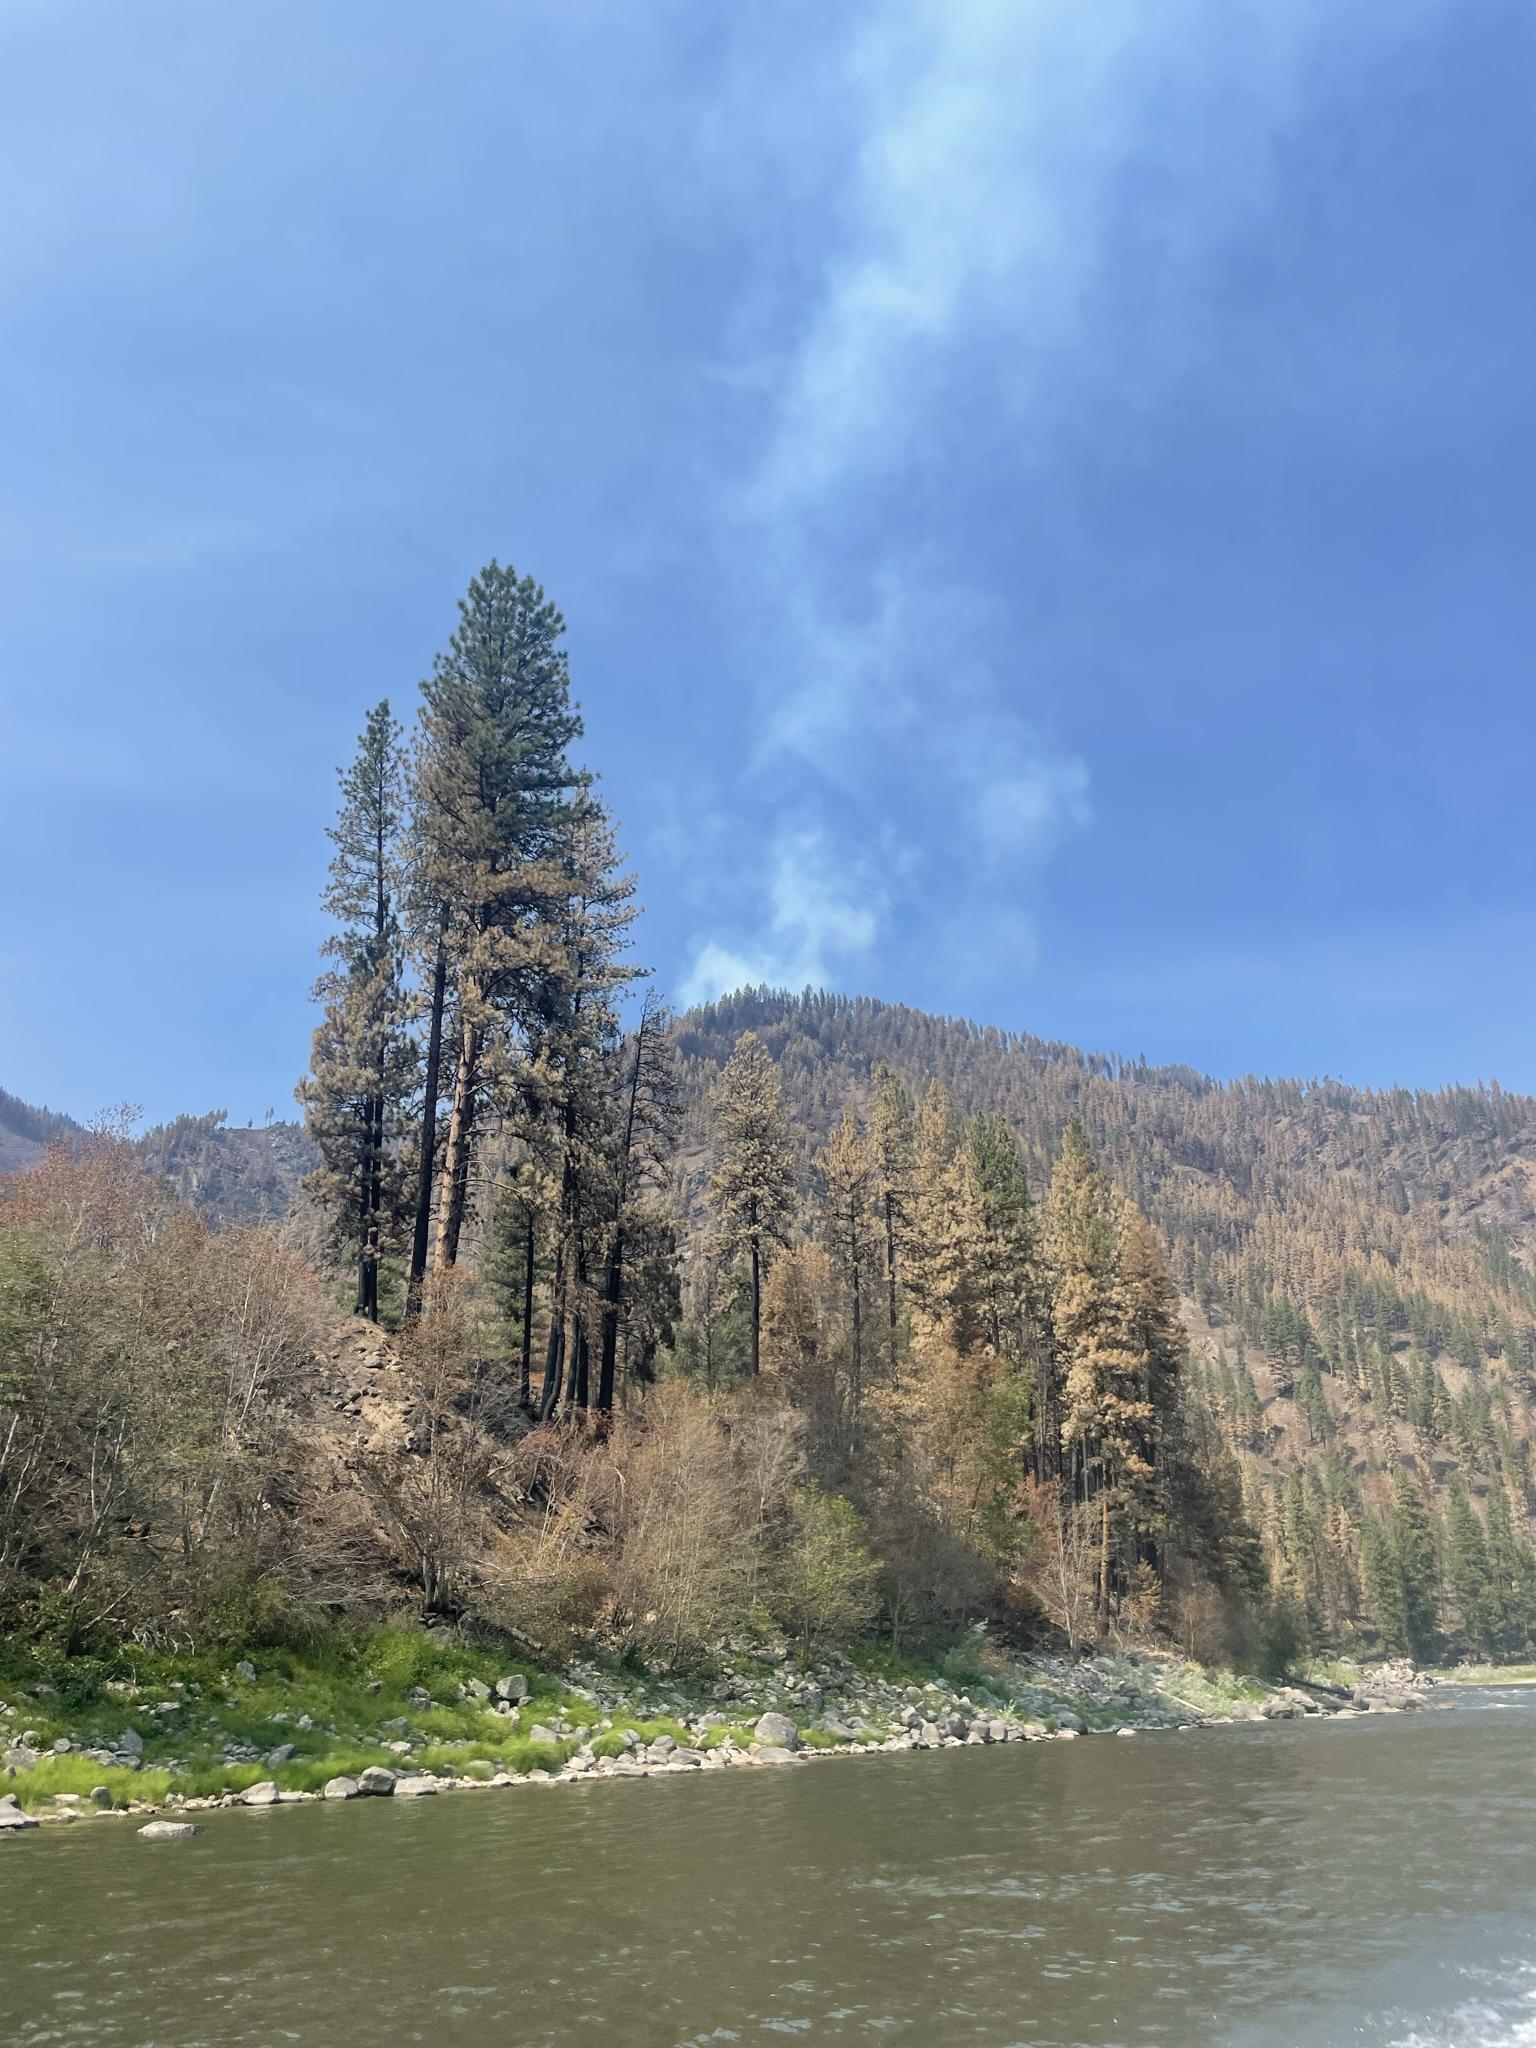 View of smoke rising above a ridge, as seen from the river